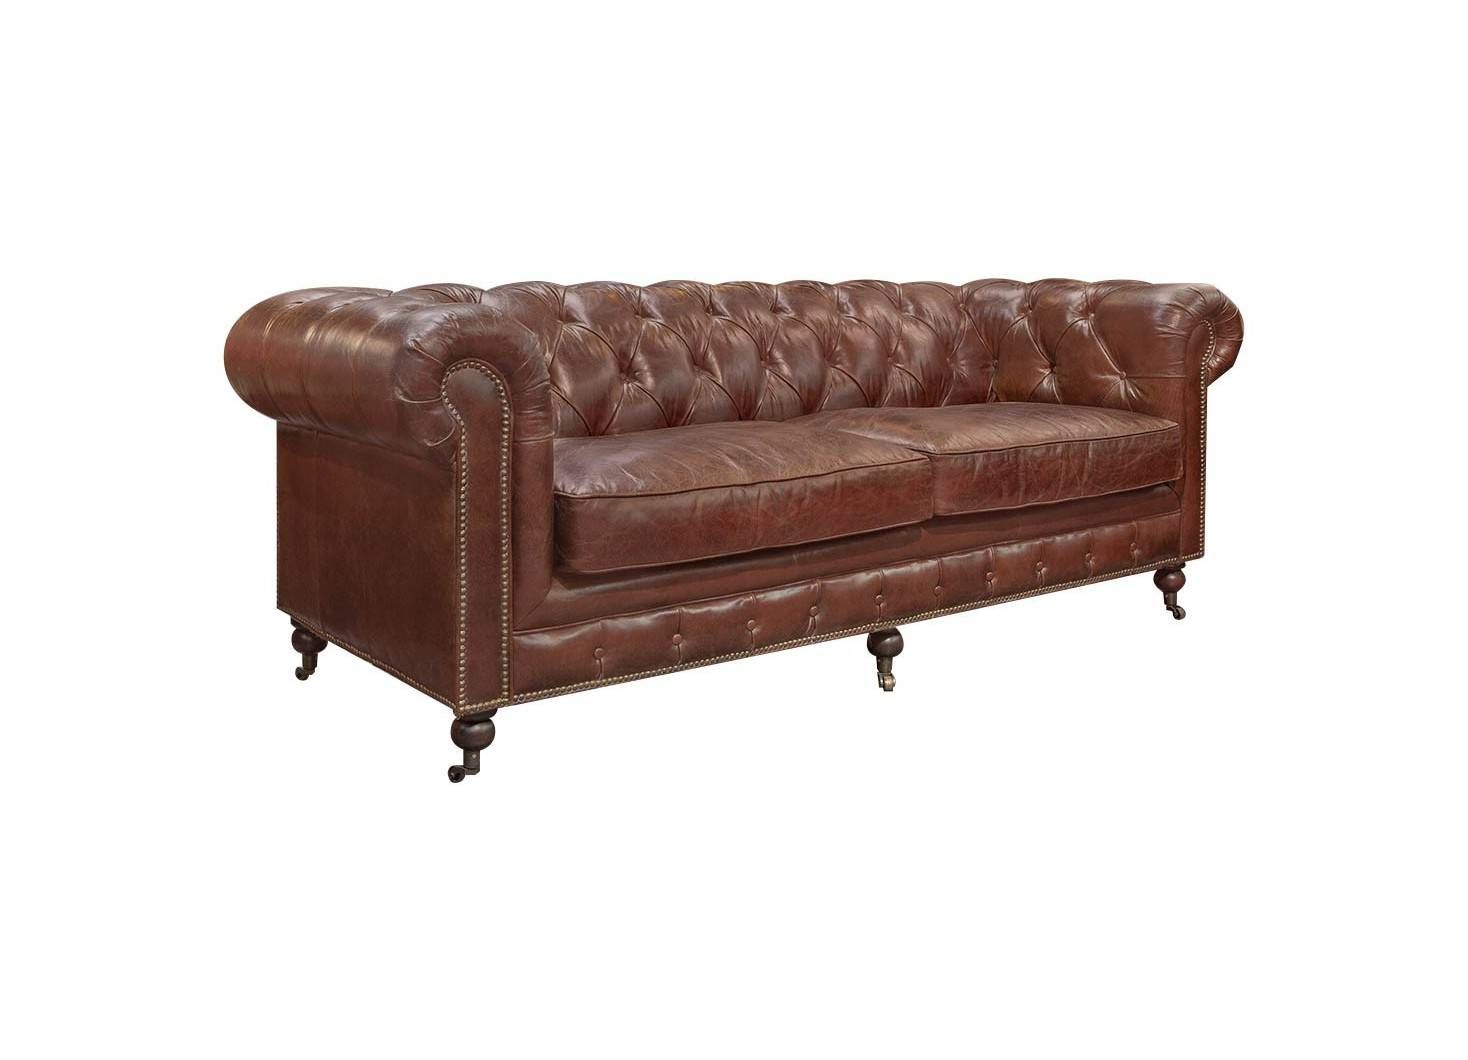 Chesterfield Sofa 3 Seater Brown Leather Regarding Traditional 3 Seater Sofas (View 7 of 15)